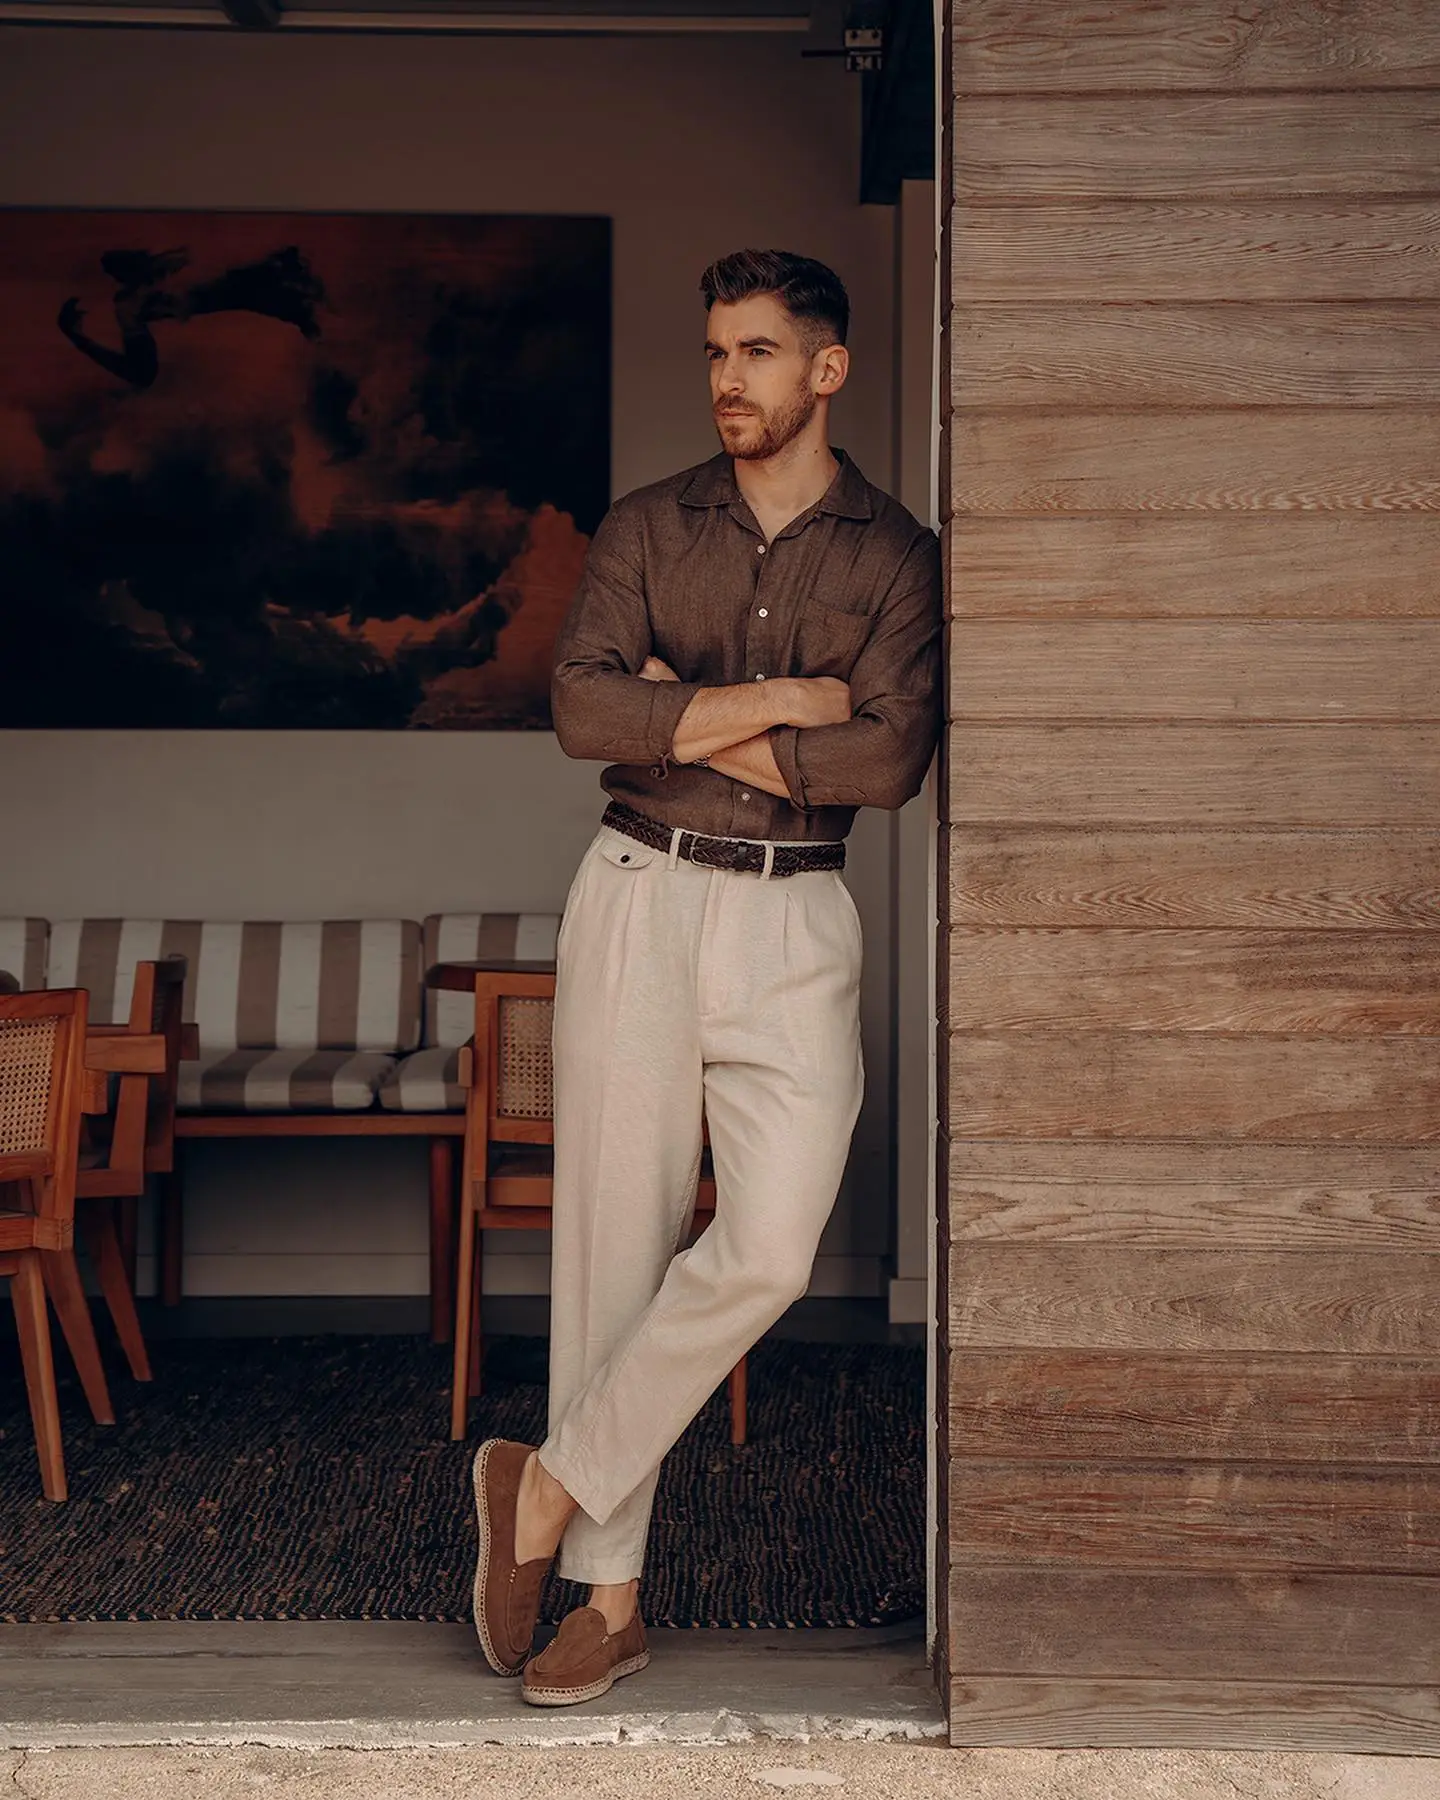 Fashionable Man In White Shirt And Beige Pants With Suspenders Sitting And  Posing On Wooden Ladder On Brick Wall Background Stock Photo  Download  Image Now  iStock